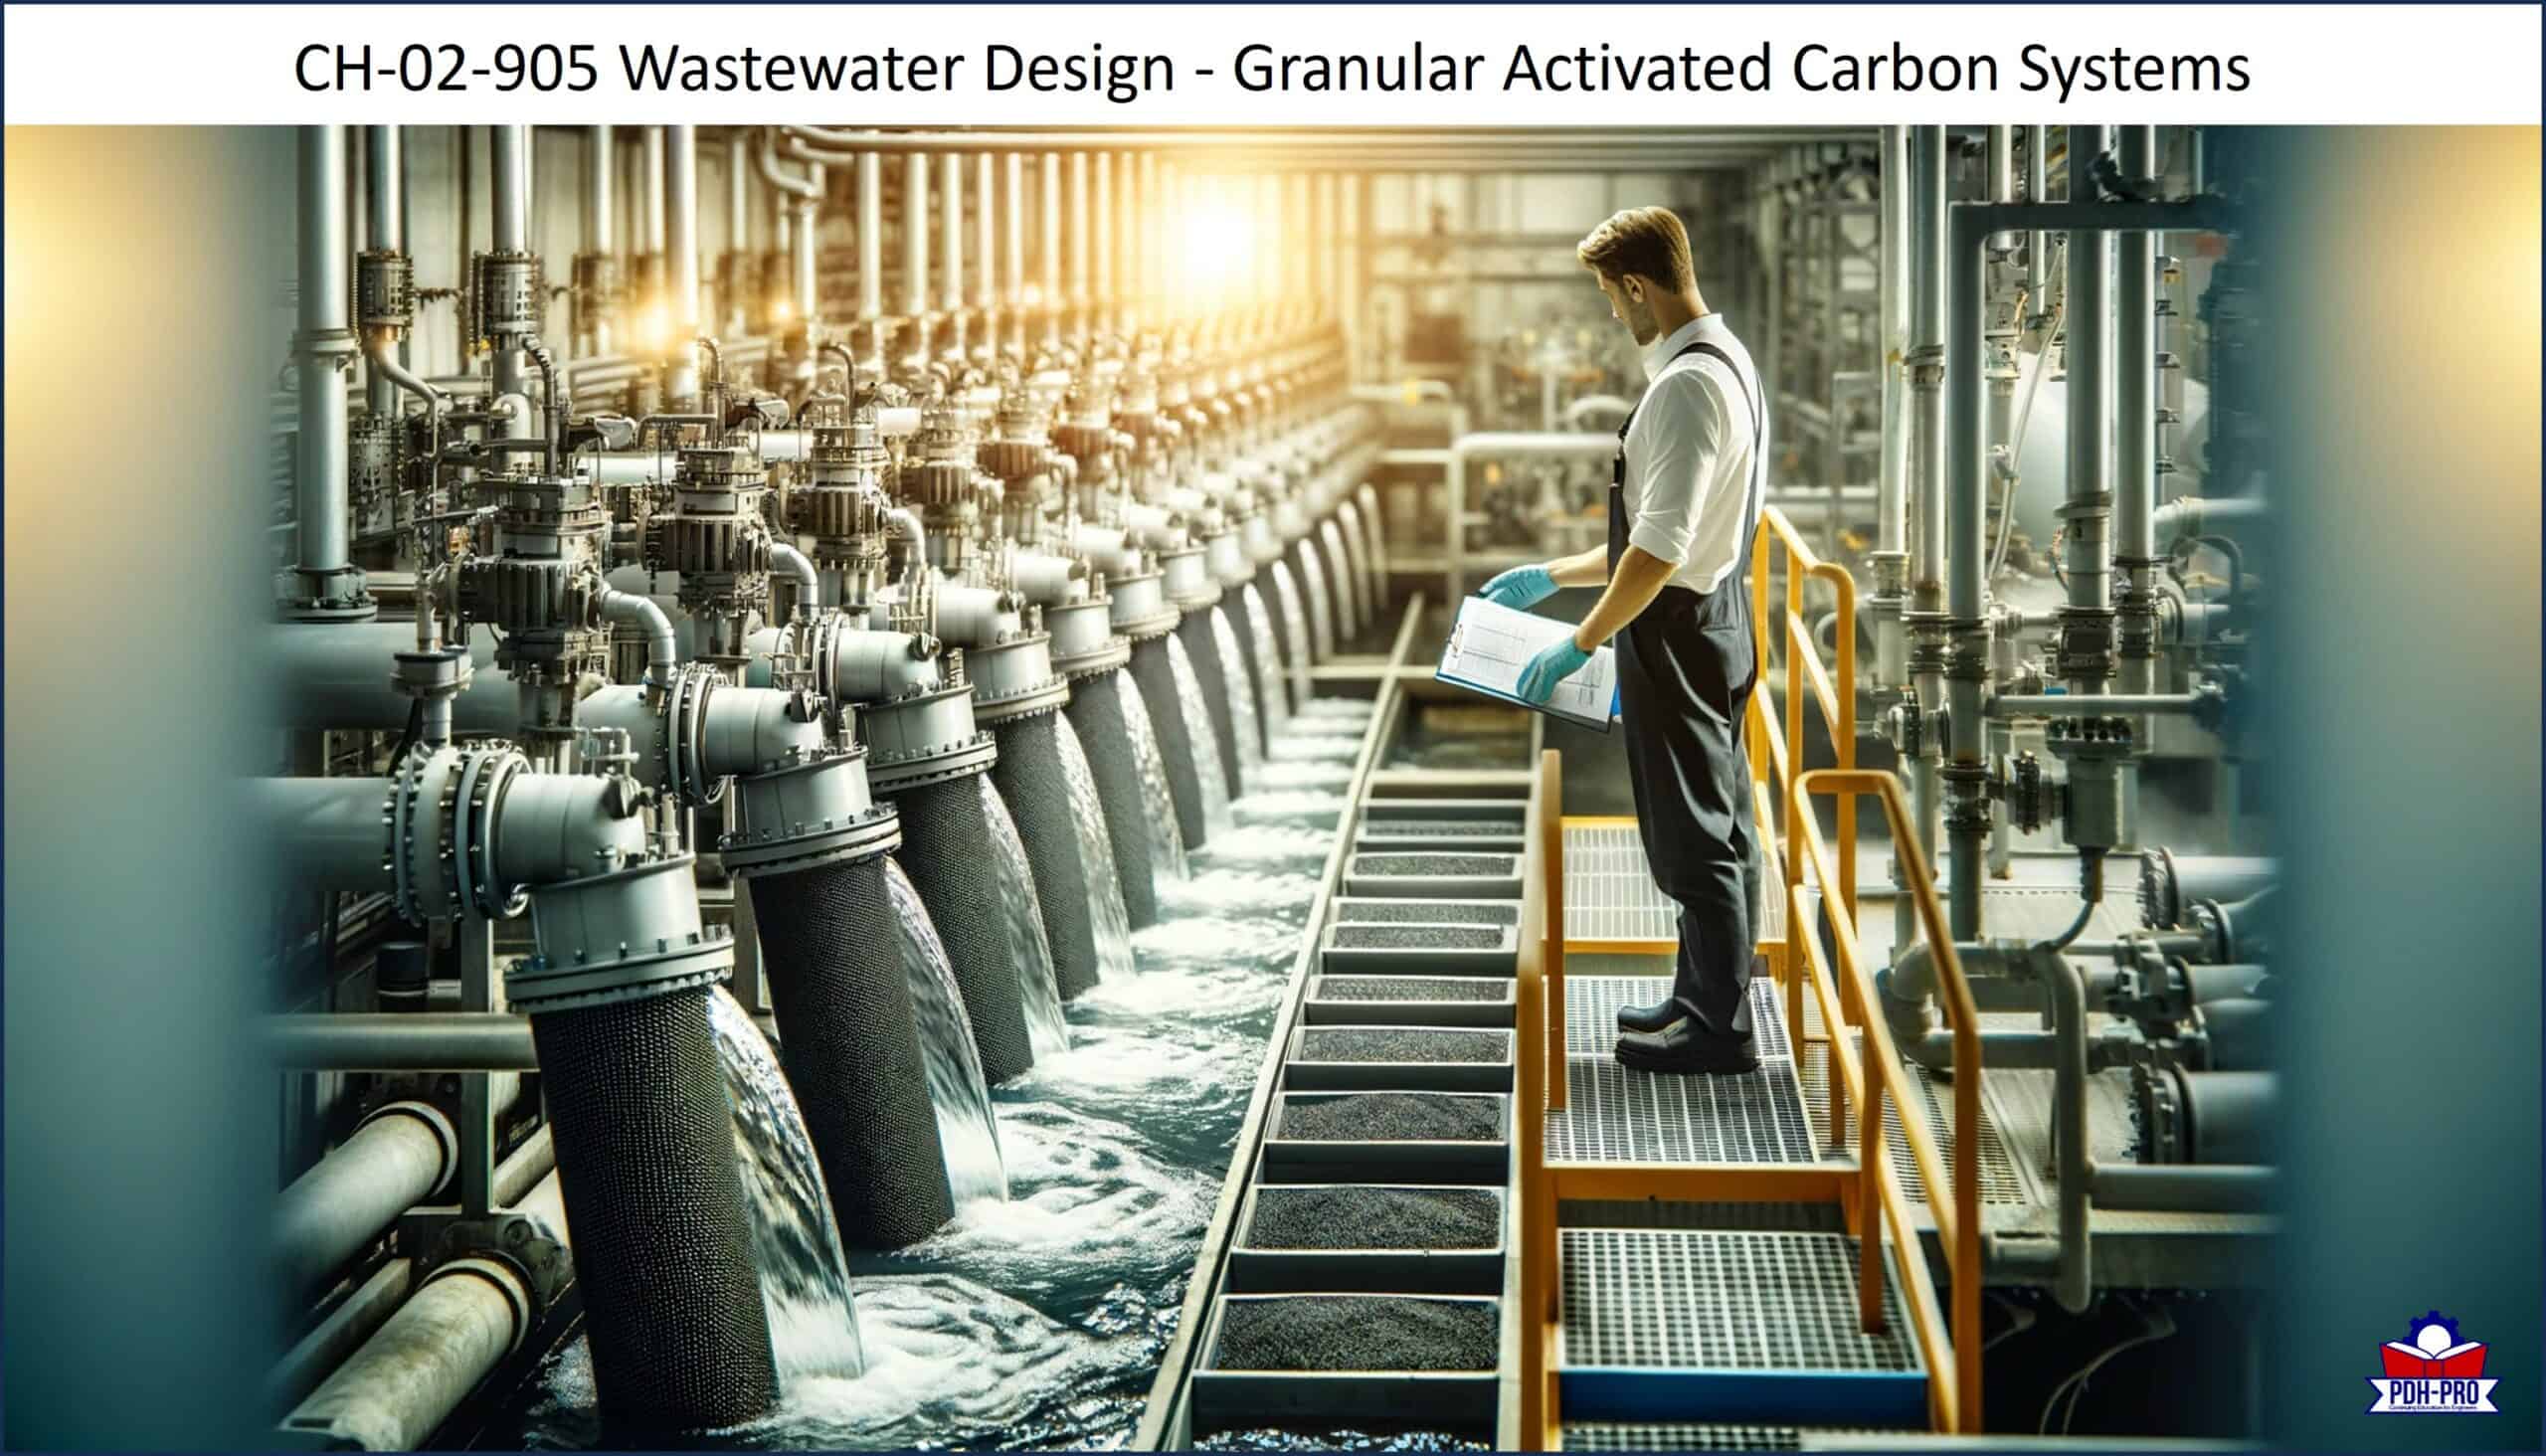 Wastewater Design - Granular Activated Carbon Systems